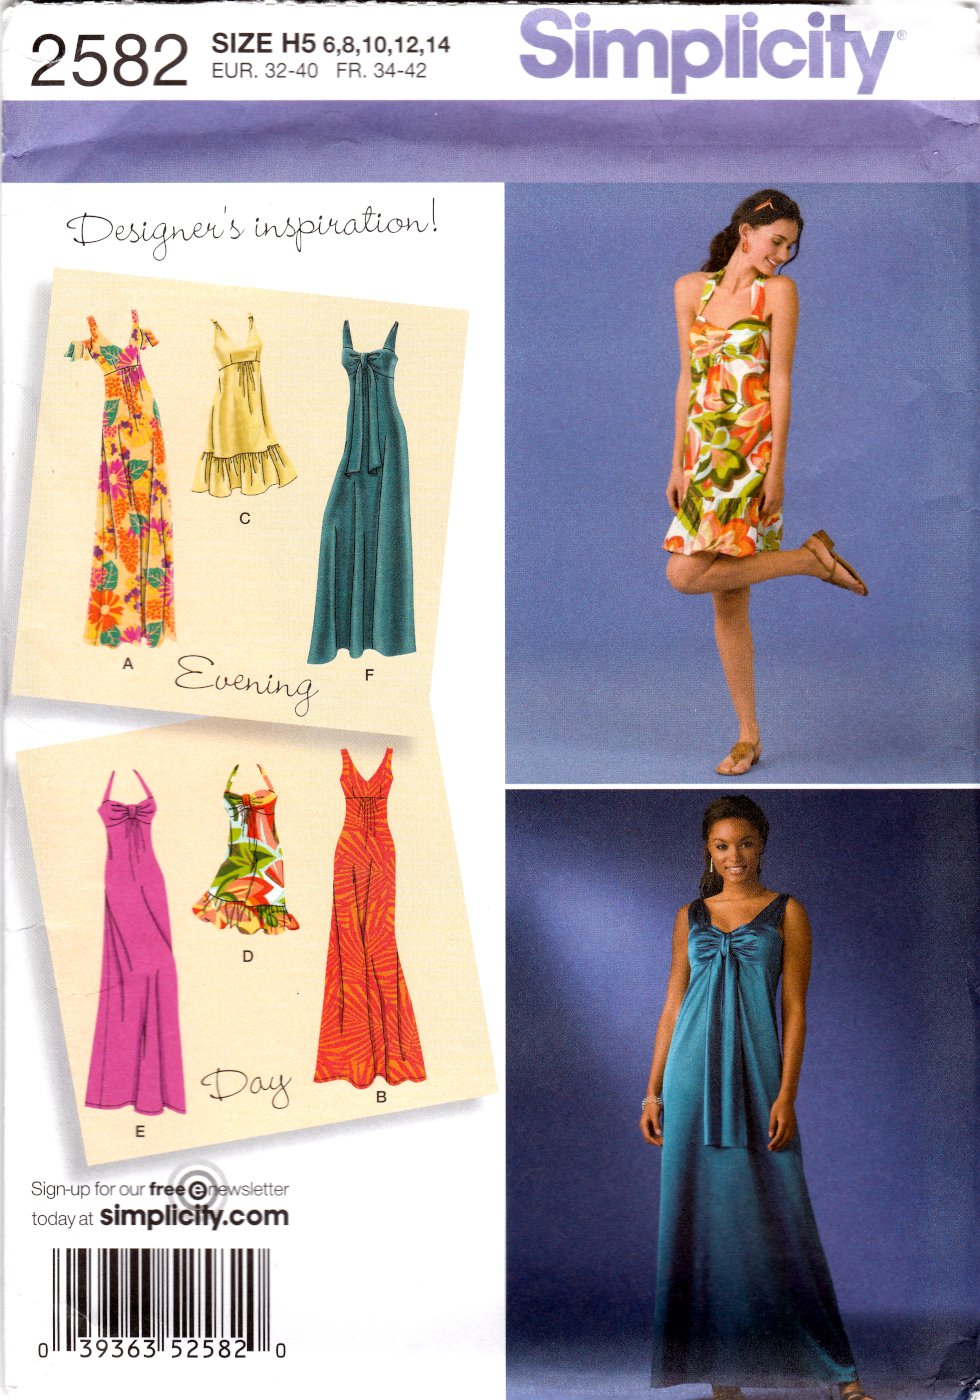 Simplicity 2582 Misses Petite Dress Three Lengths Sleeveless Sewing Pattern Sizes 6,8,10,12,14